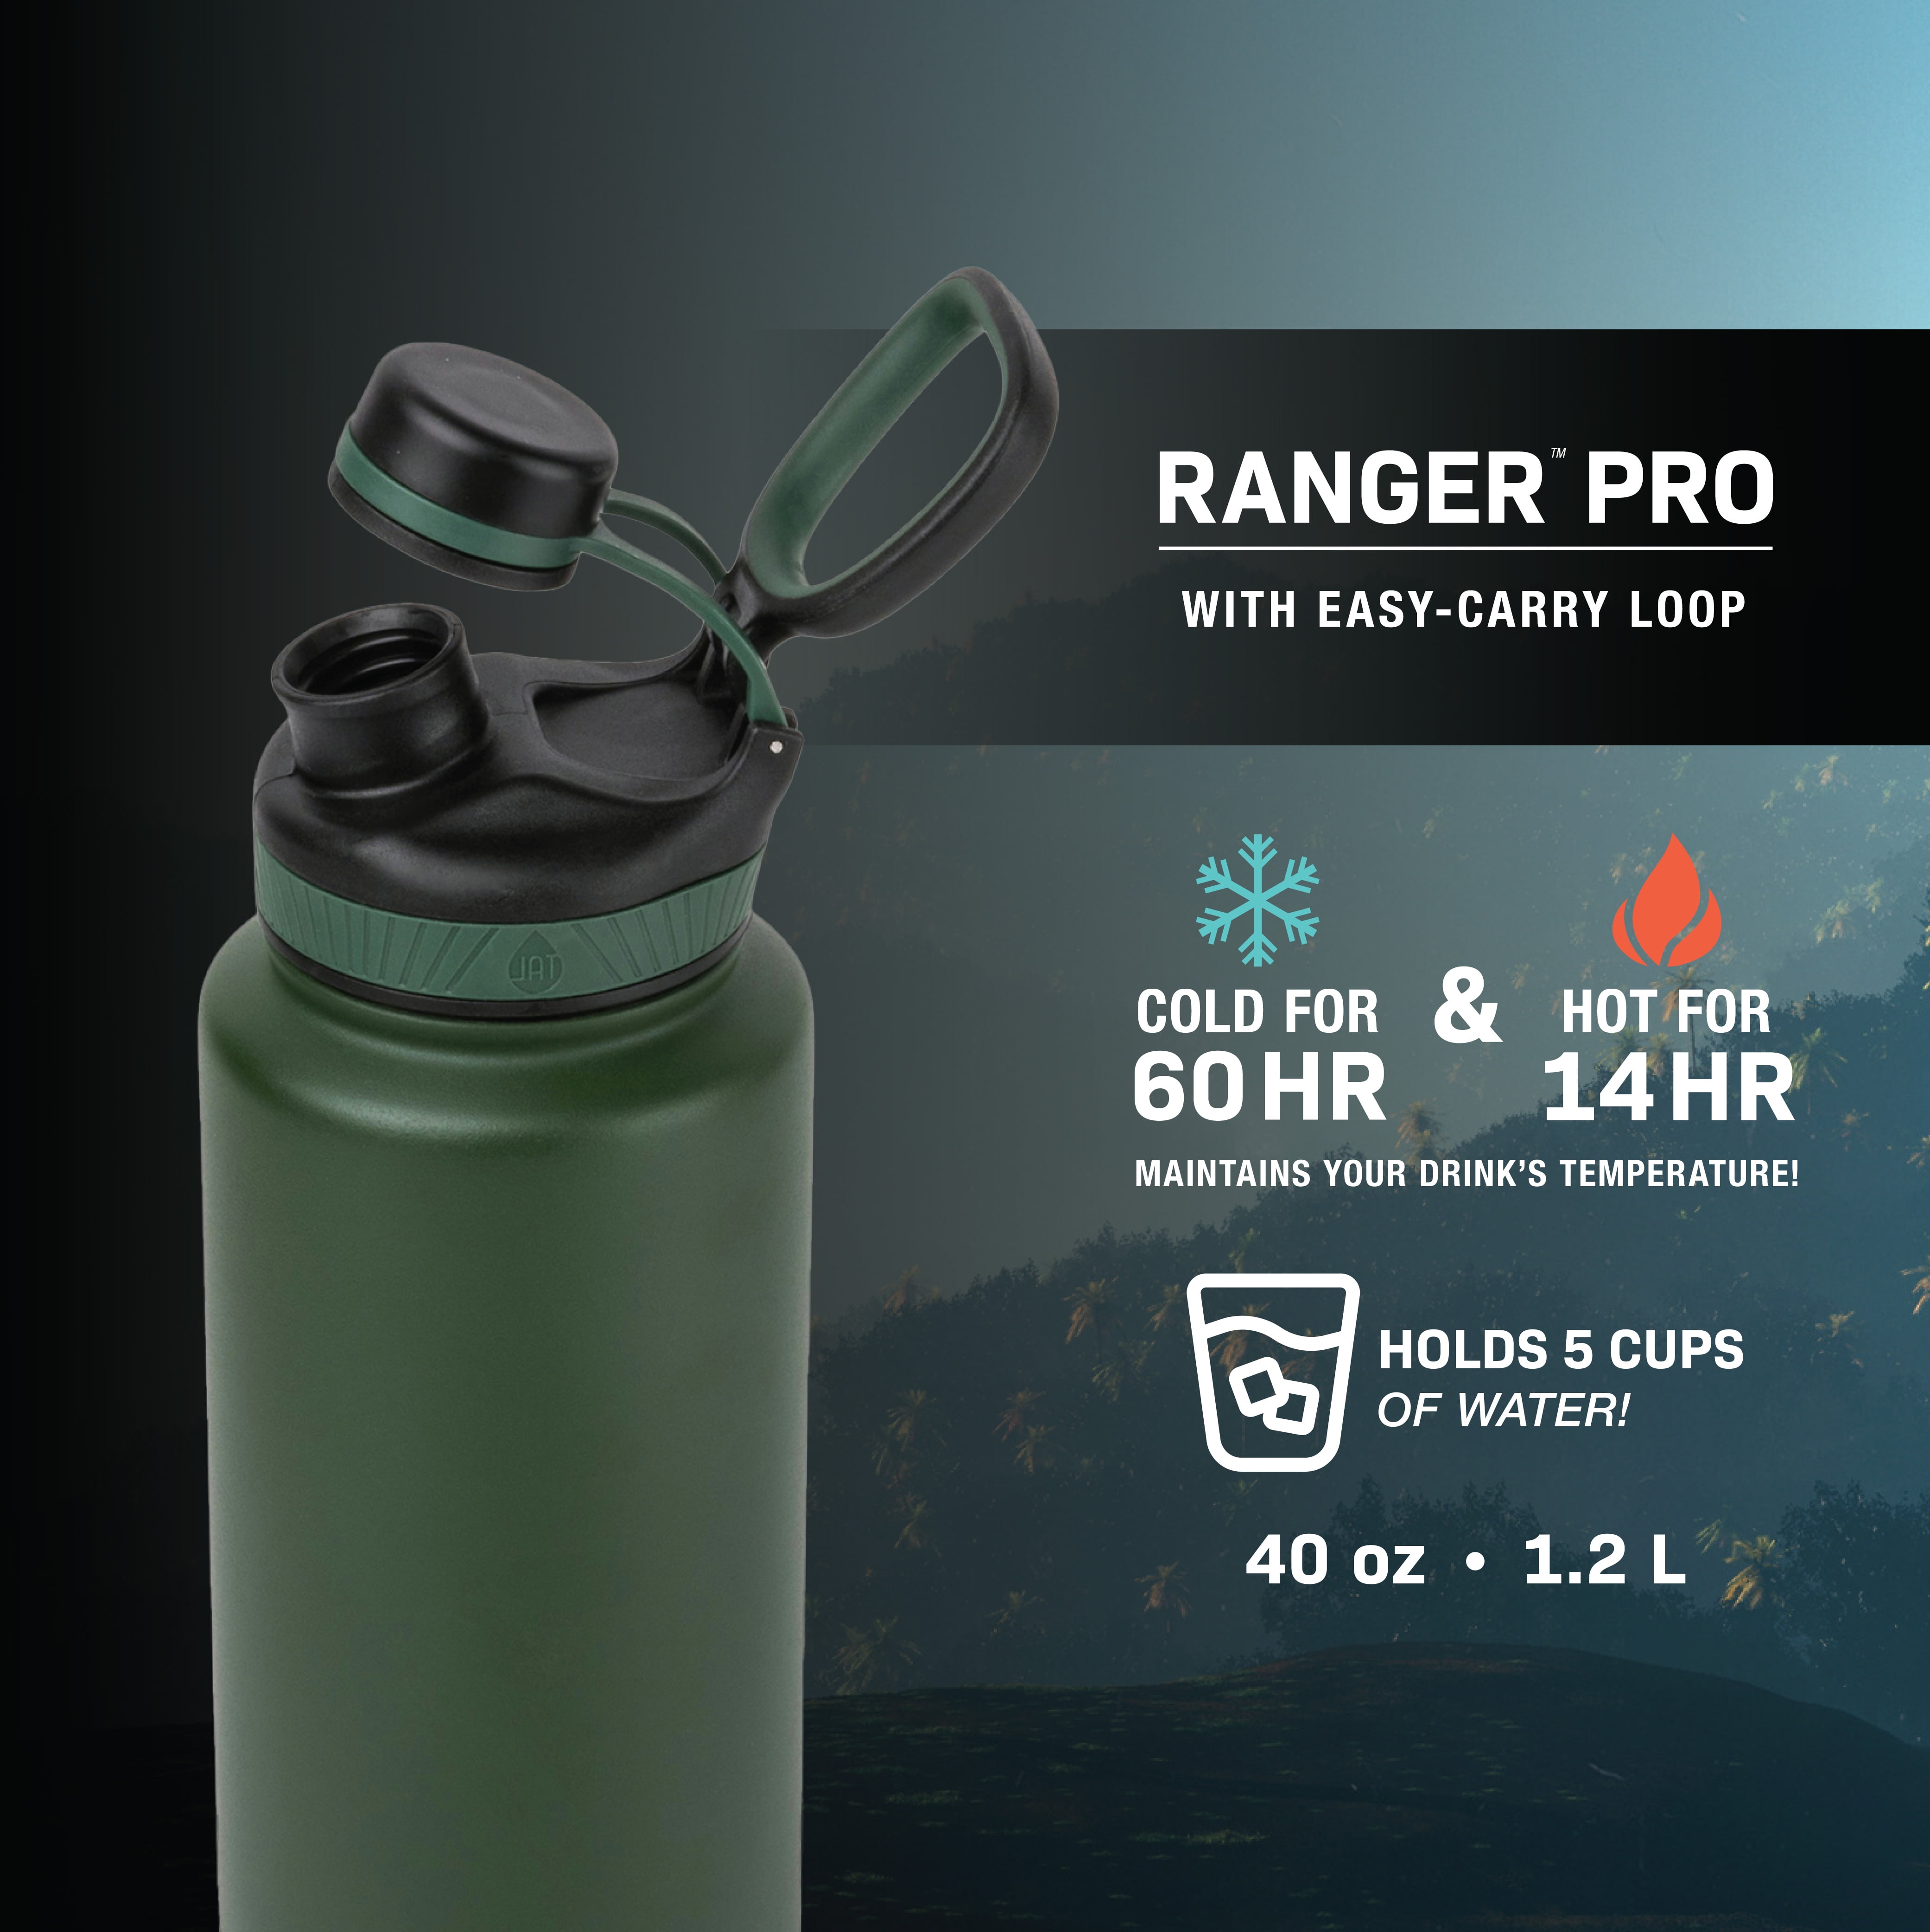  MUHU TAL Ranger 64 oz Black Solid Print Stainless Steel Water  Bottle with Wide Mouth Lid (Coral) : Sports & Outdoors